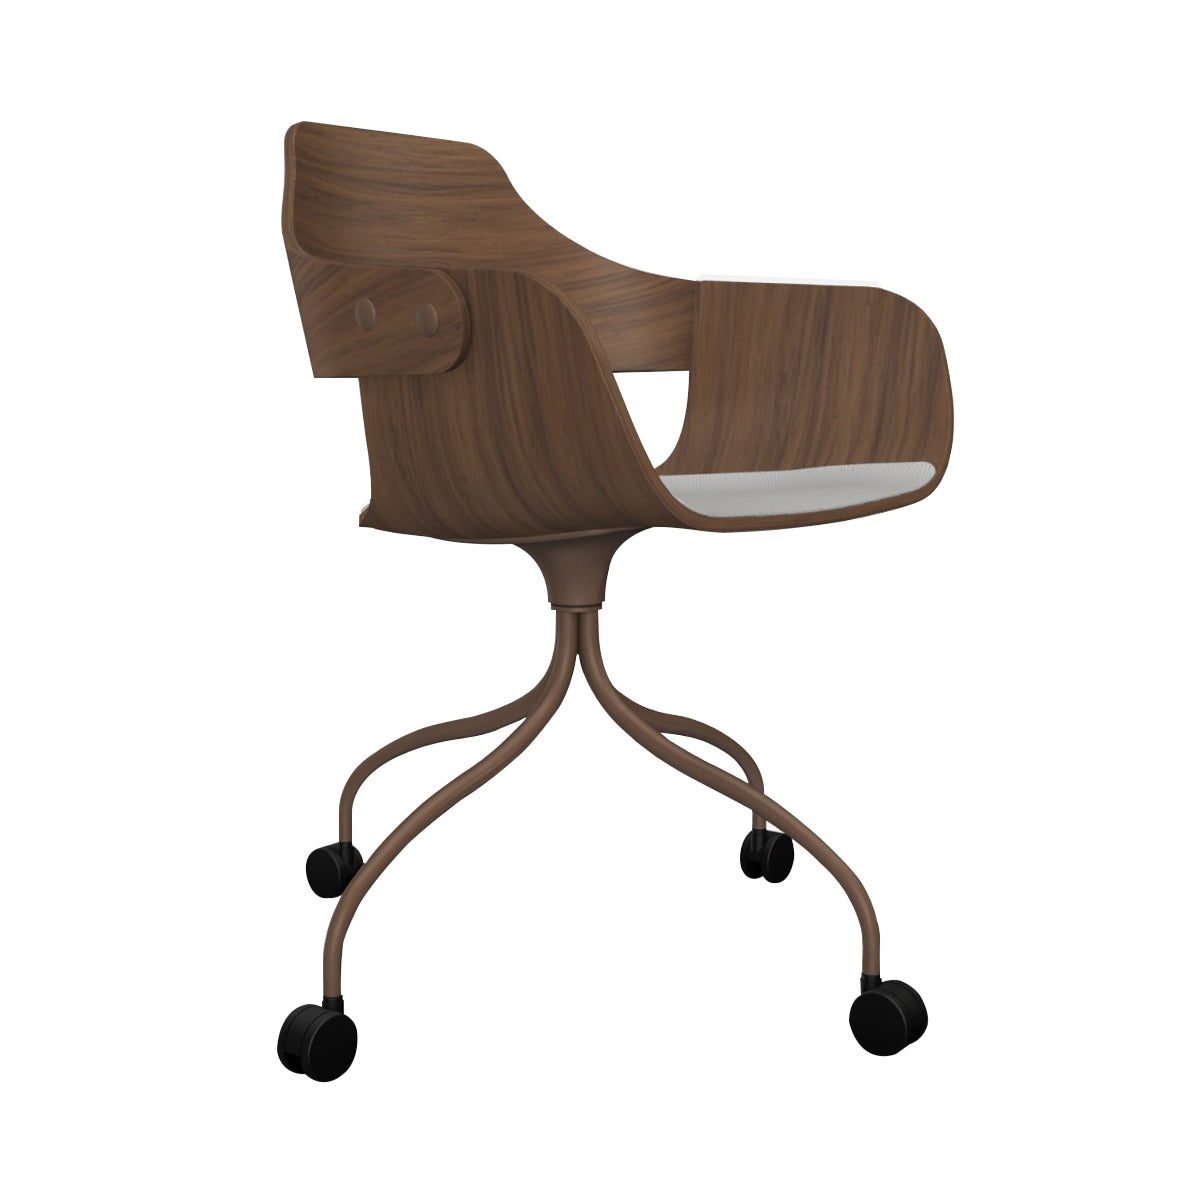 Showtime Chair with Wheel: Seat Upholstered + Pale Brown